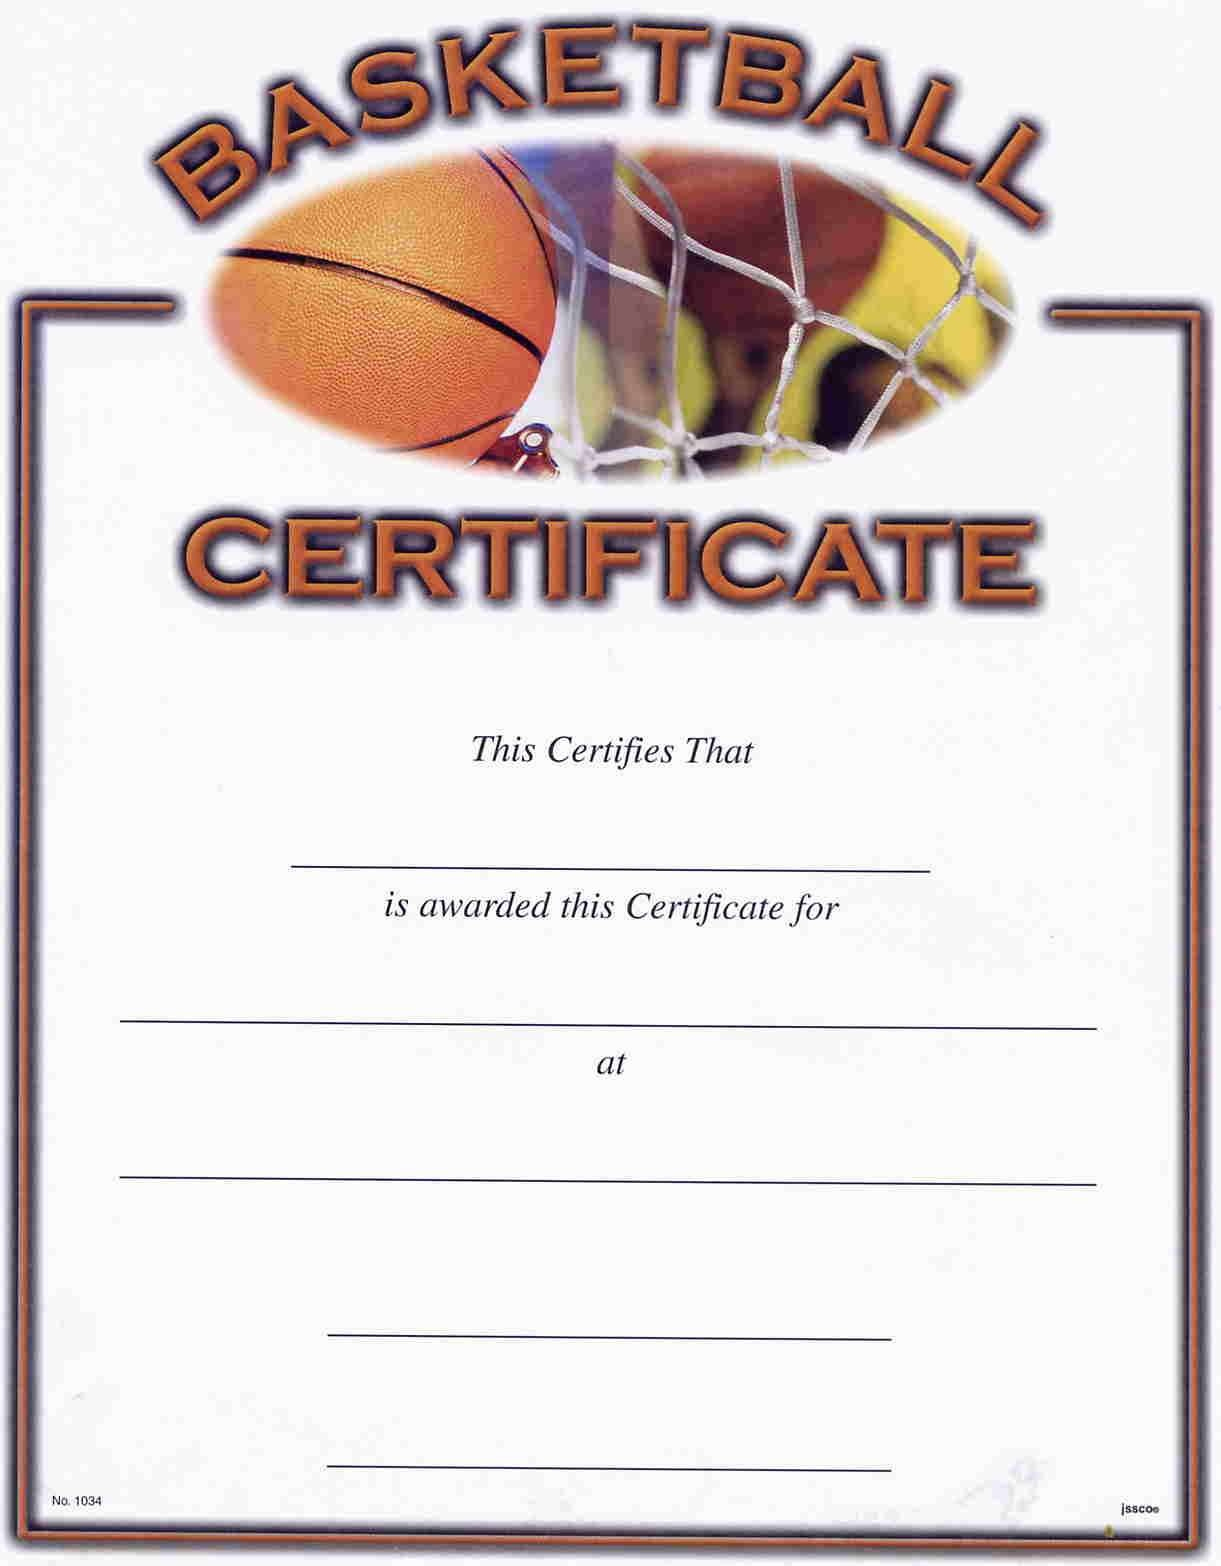 Basketball Participation Certificate Free Printable | Free with Simple Basketball Achievement Certificate Editable Templates